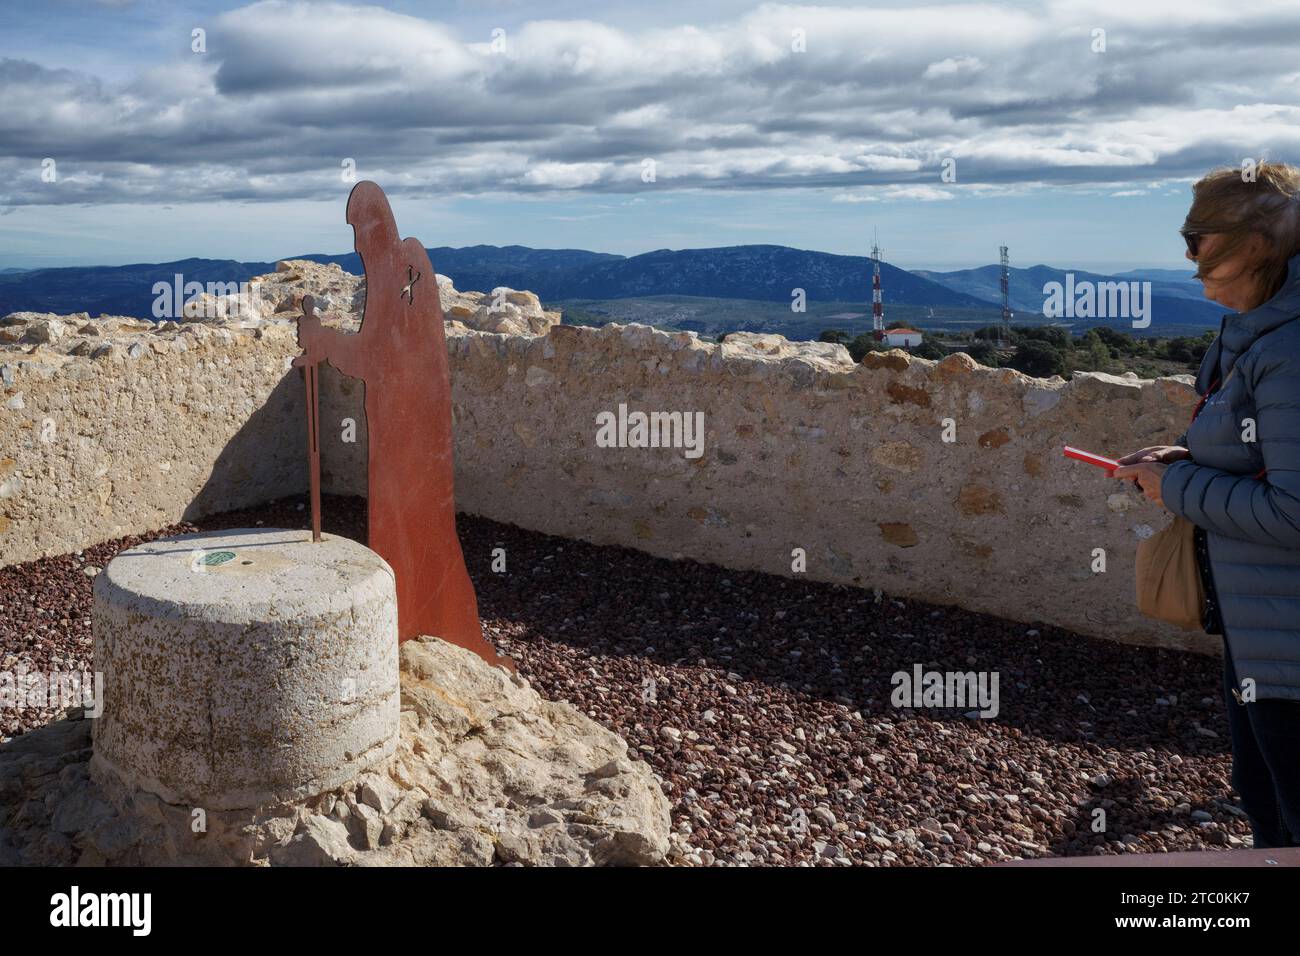 Statue and sculpture of the Templar Order in the castle of the town of Culla, declared the most beautiful in Spain, Castellon, Spain, Europe Stock Photo